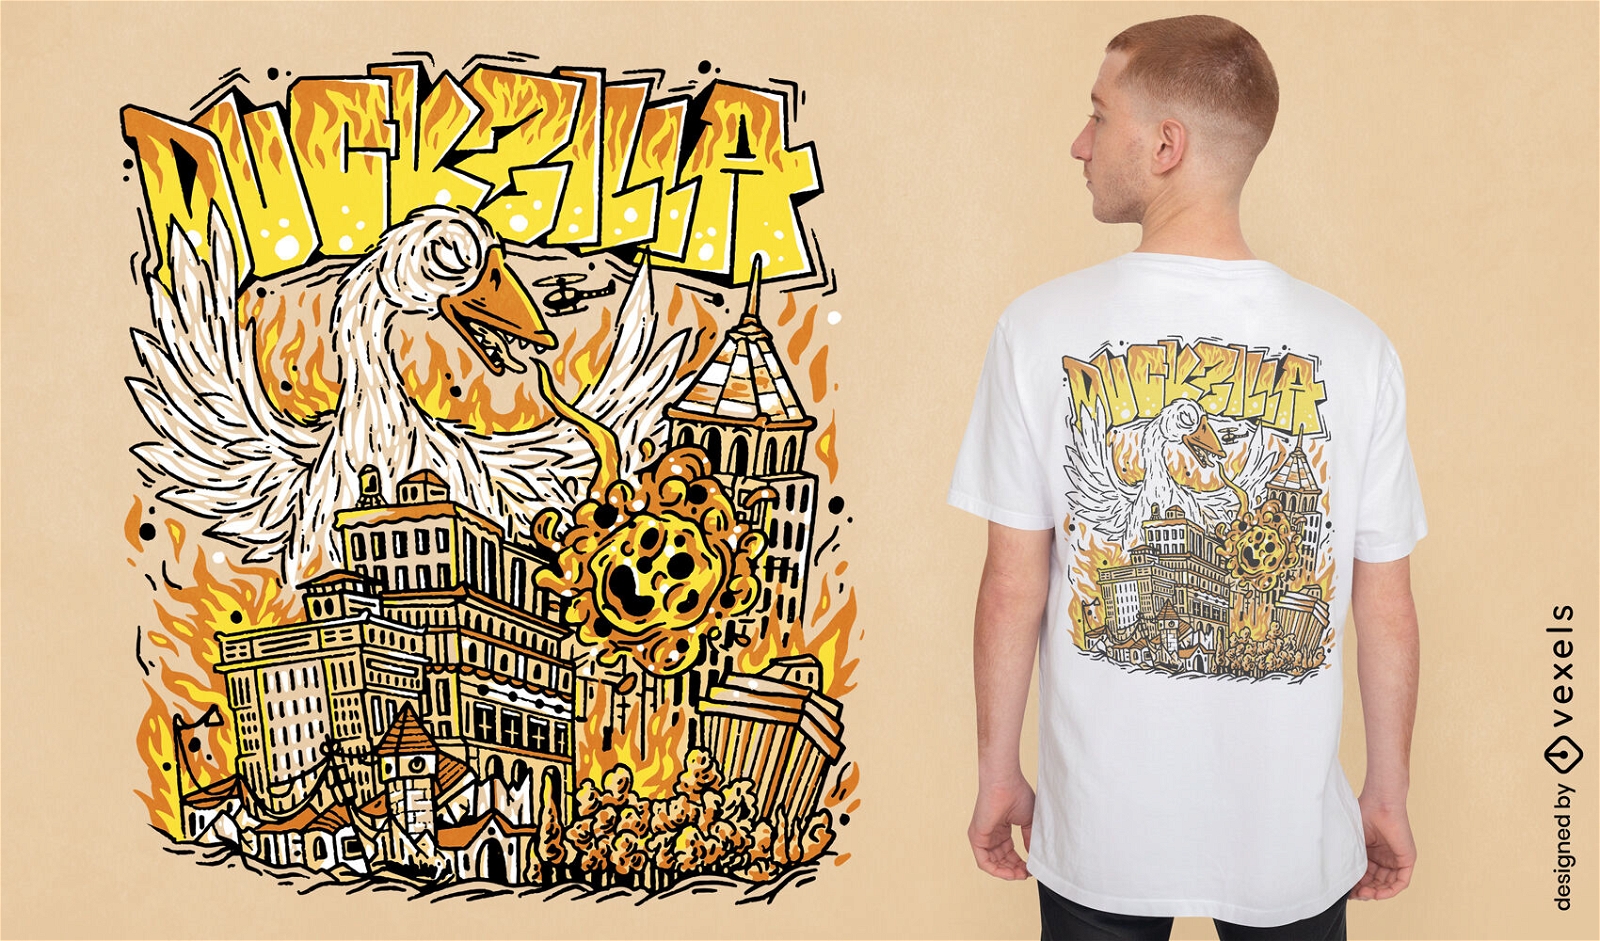 Giant goose attacking city t-shirt design